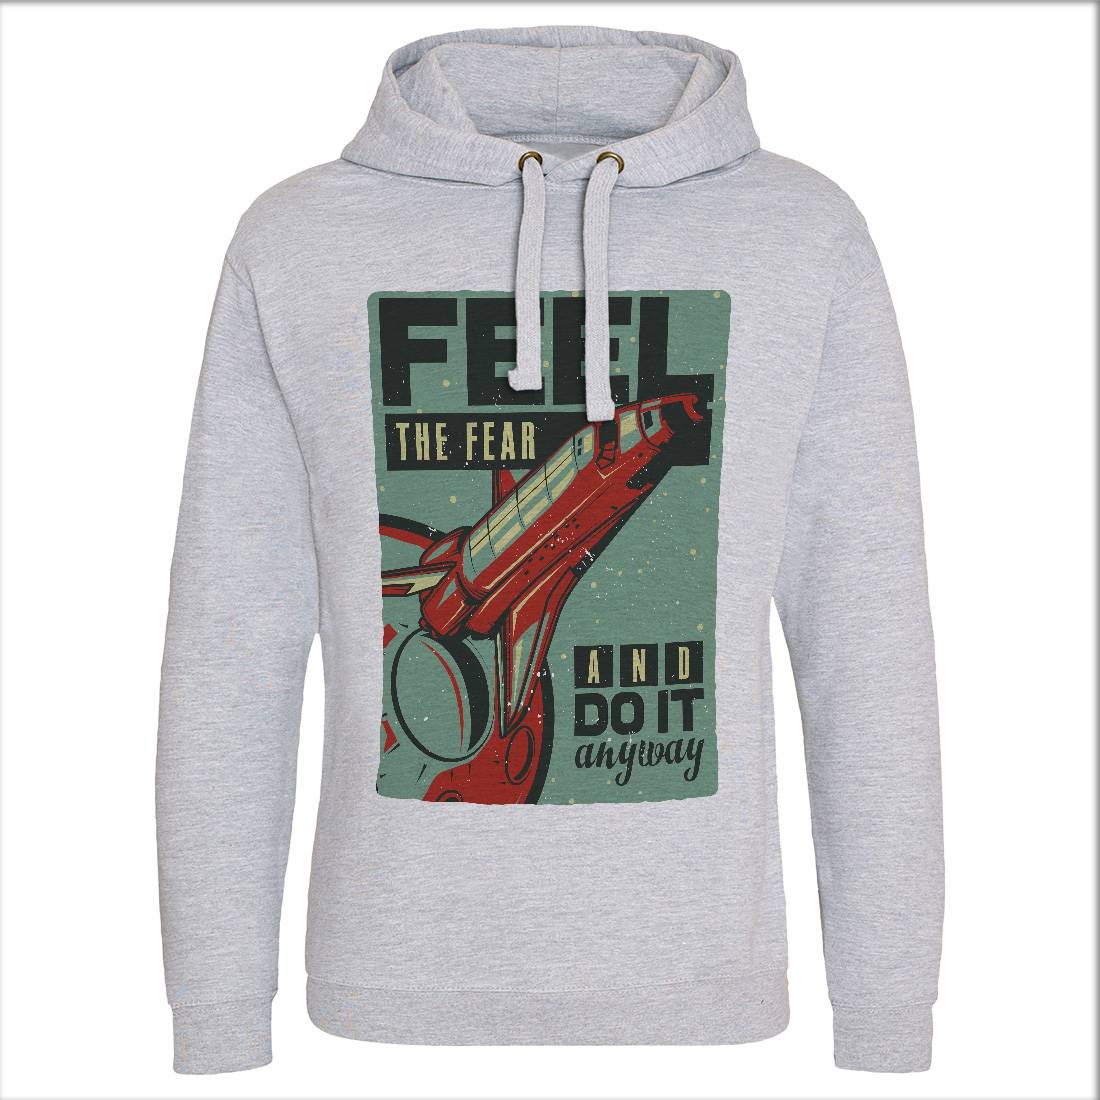 Shuttle Mens Hoodie Without Pocket Space B169